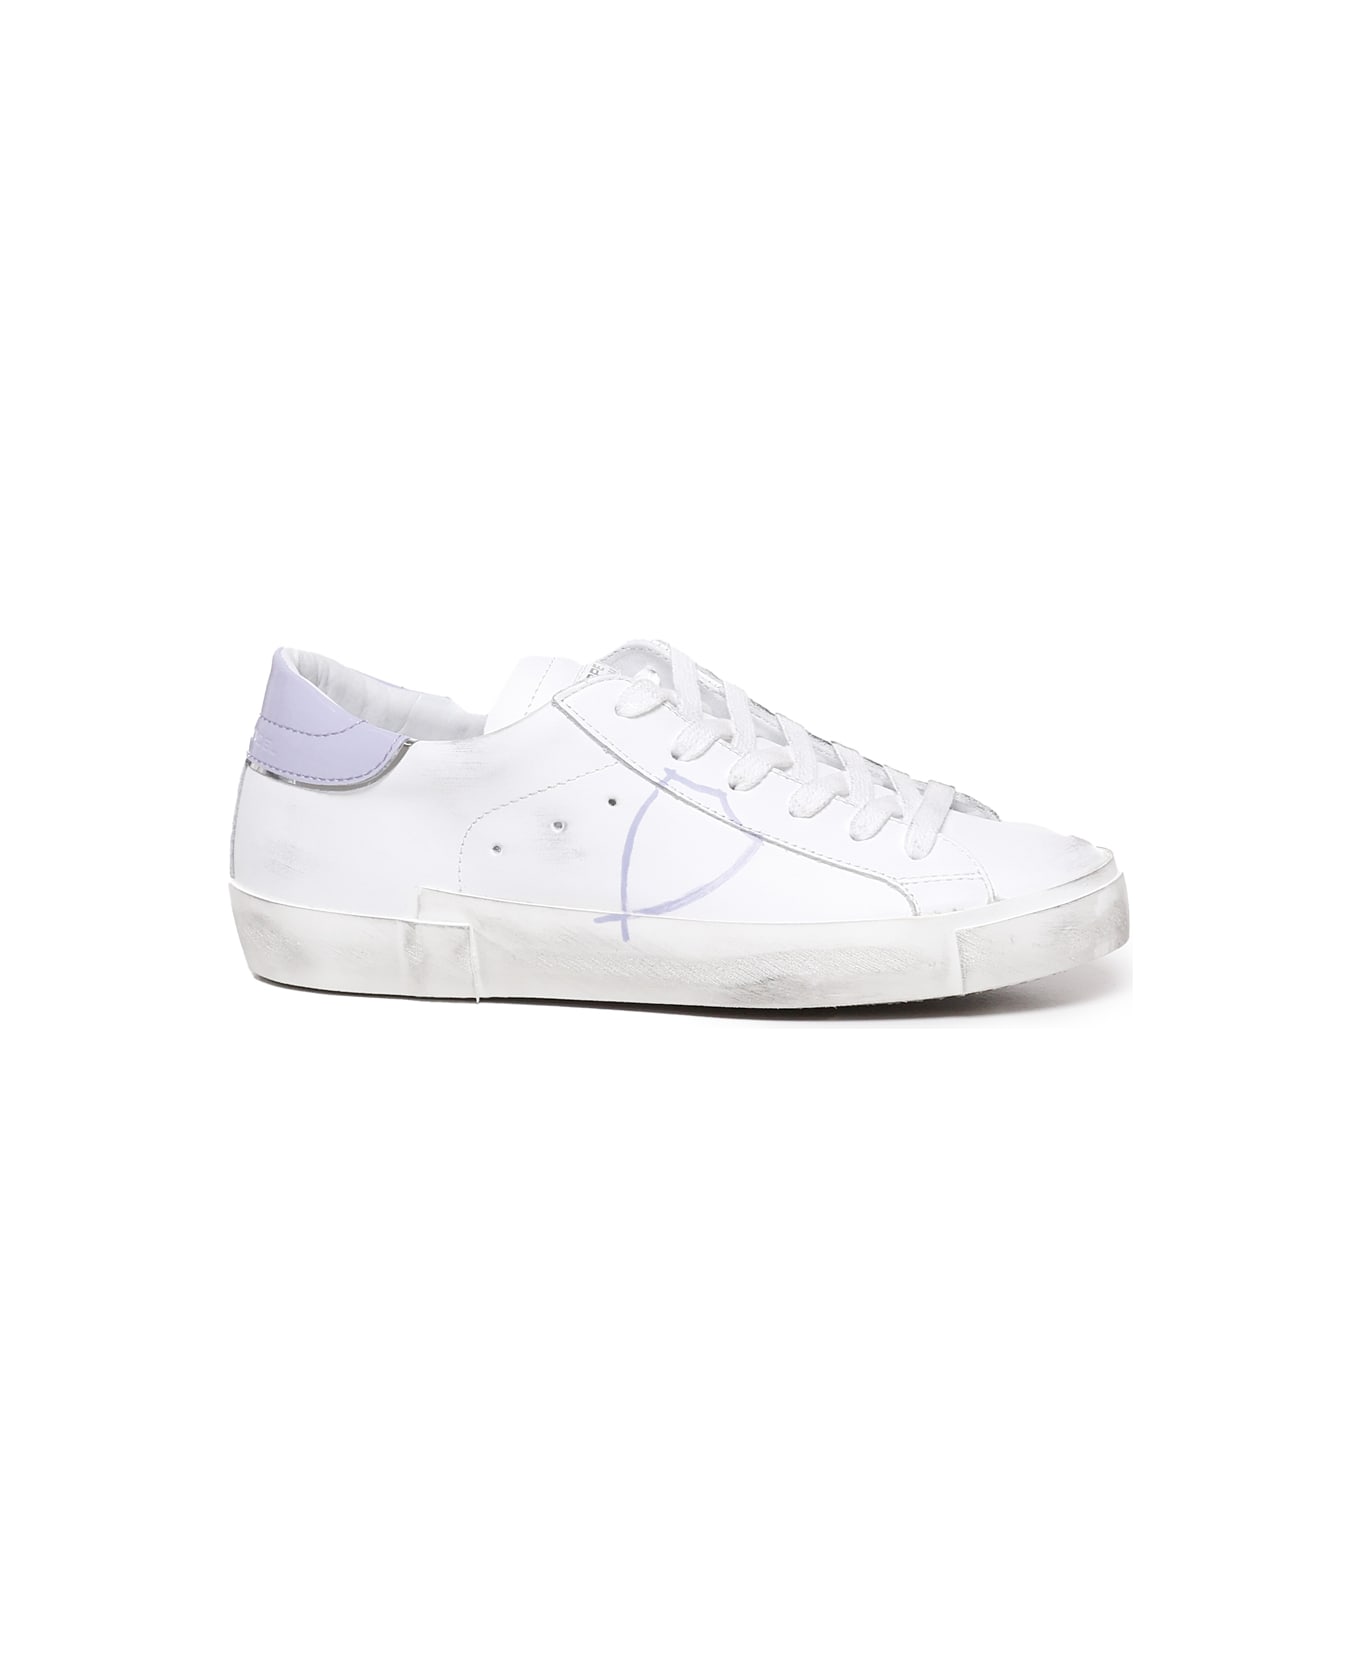 Philippe Model Prsx Casual Leather Sneaker - White, lillac スニーカー